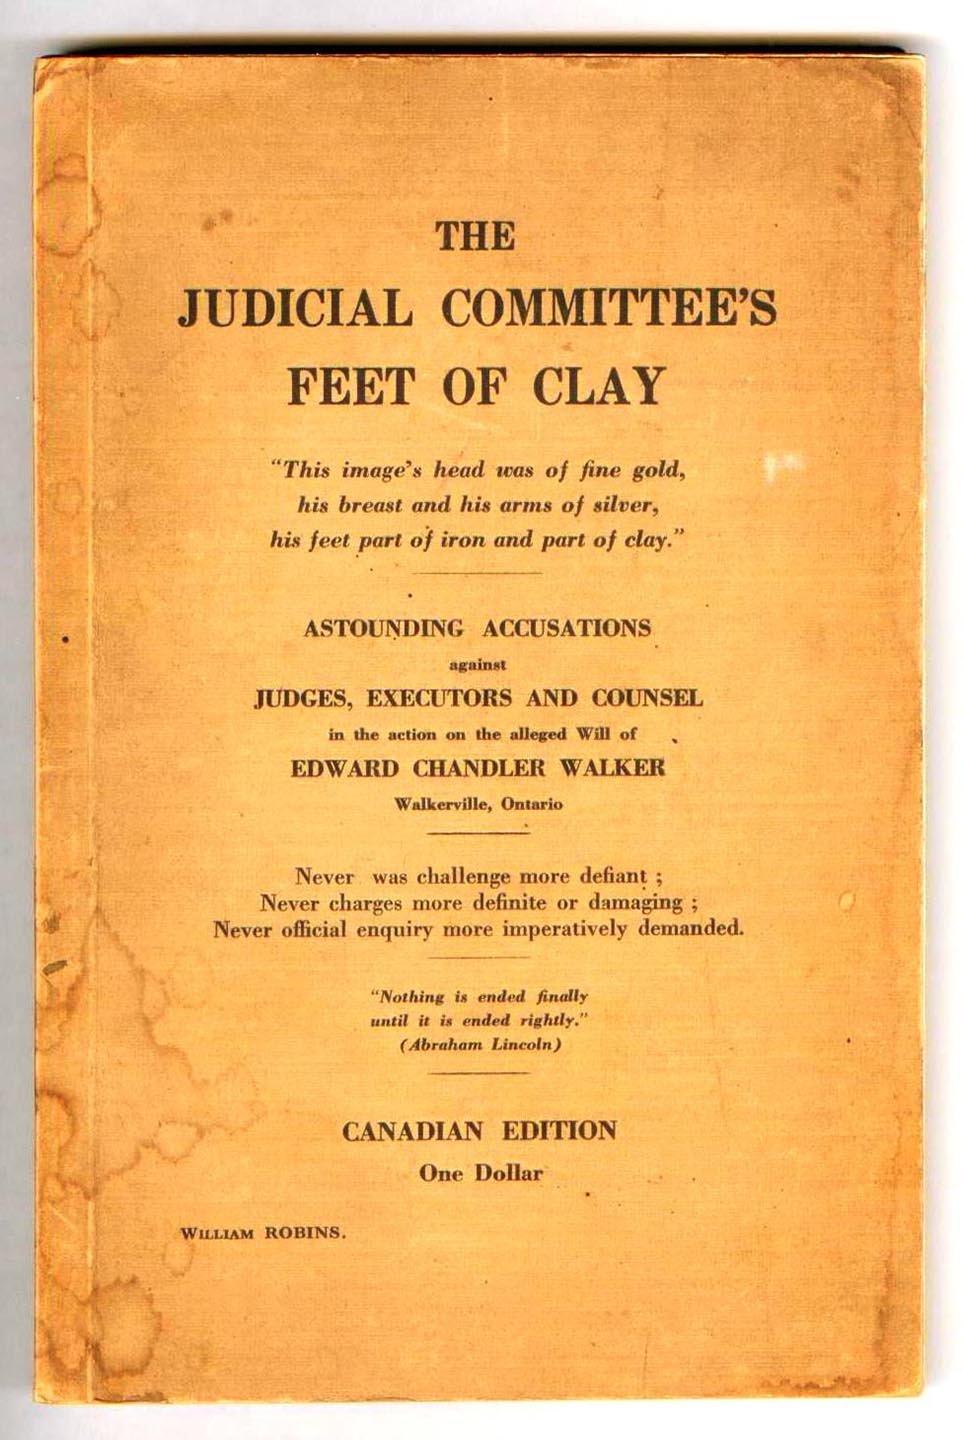 The Judicial Committee's Feet of Clay: Astounding Accusations against Judges, Executors and Counsel in the action on the alleged Will of Edward Chandler Walker, Walkerville, Ontario